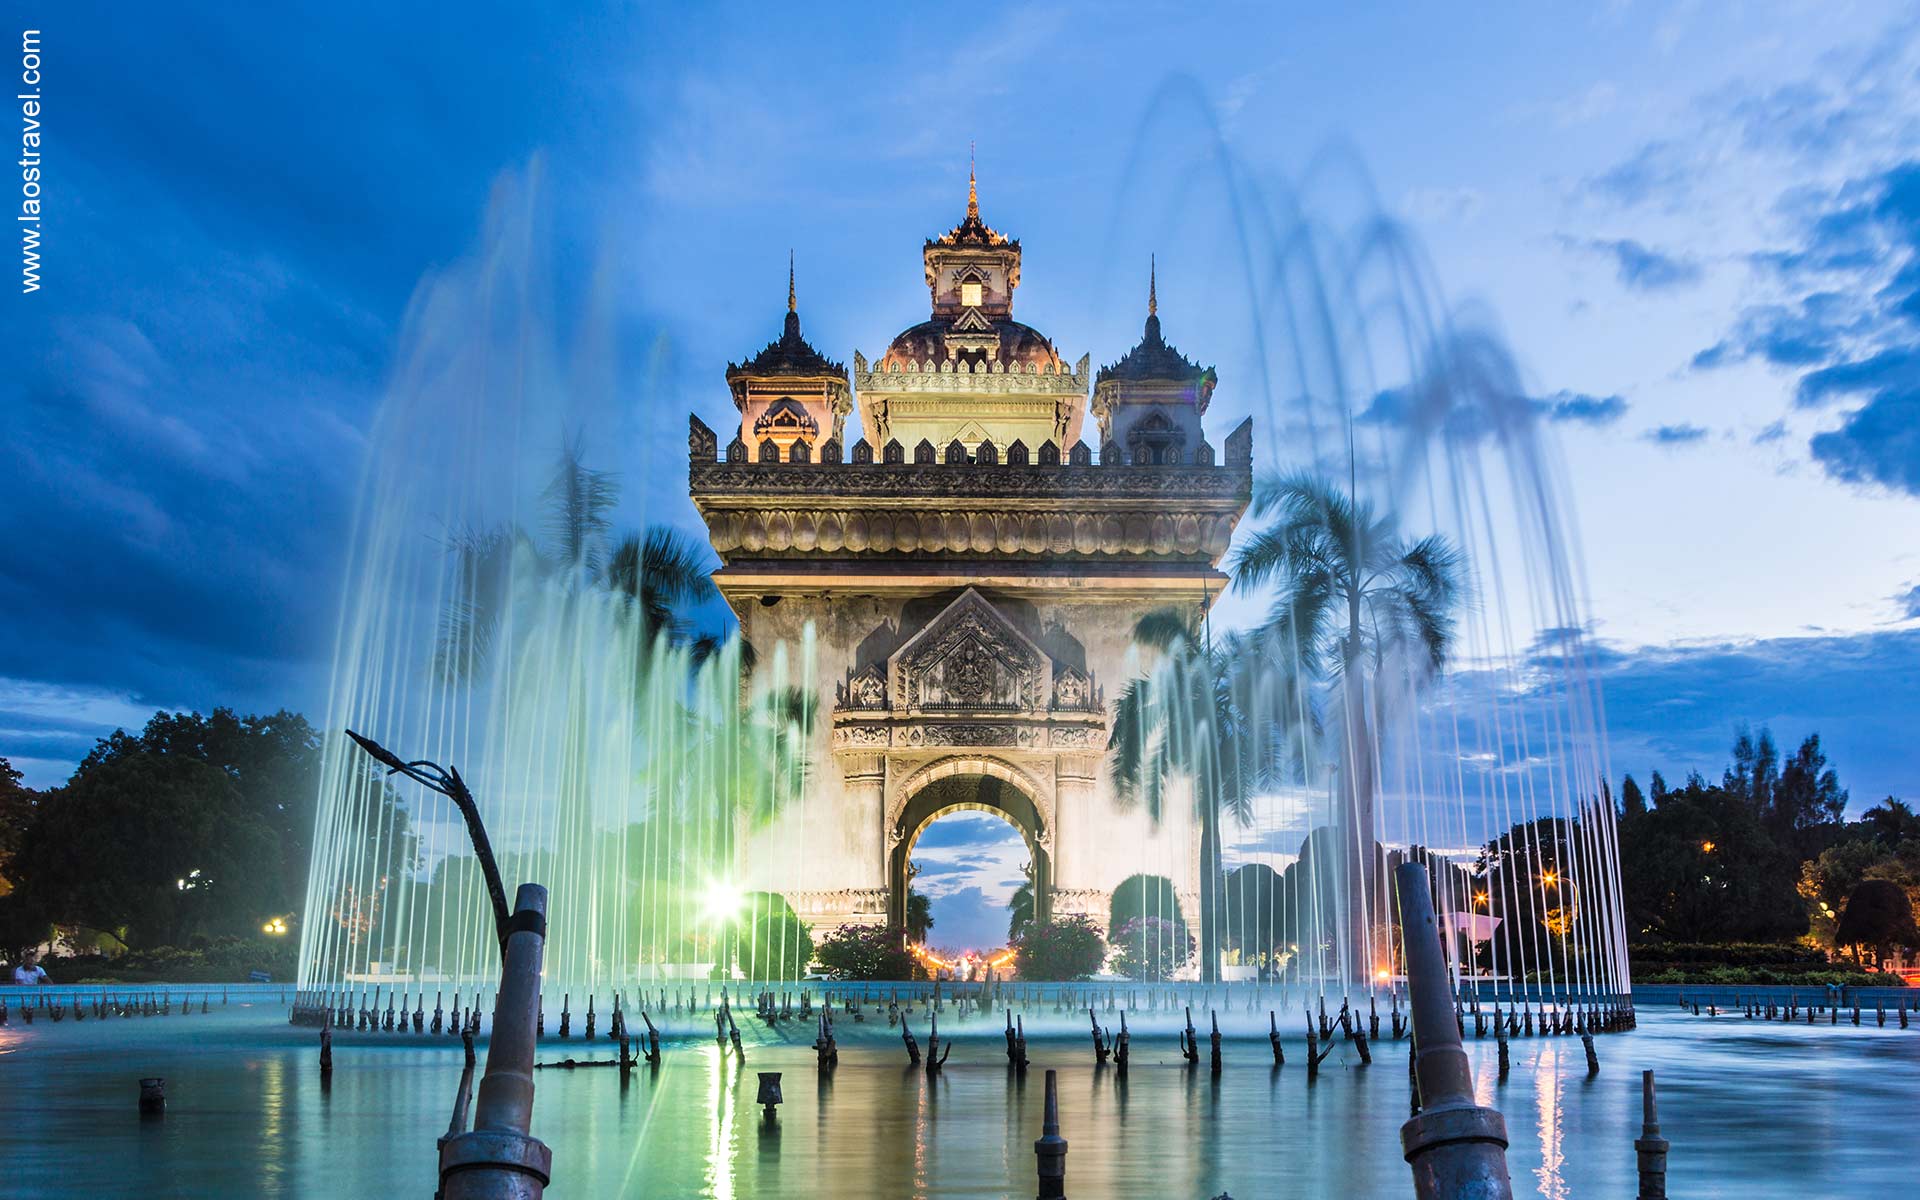 A stunning shot of Patuxai lit up by fountains and the setting sun